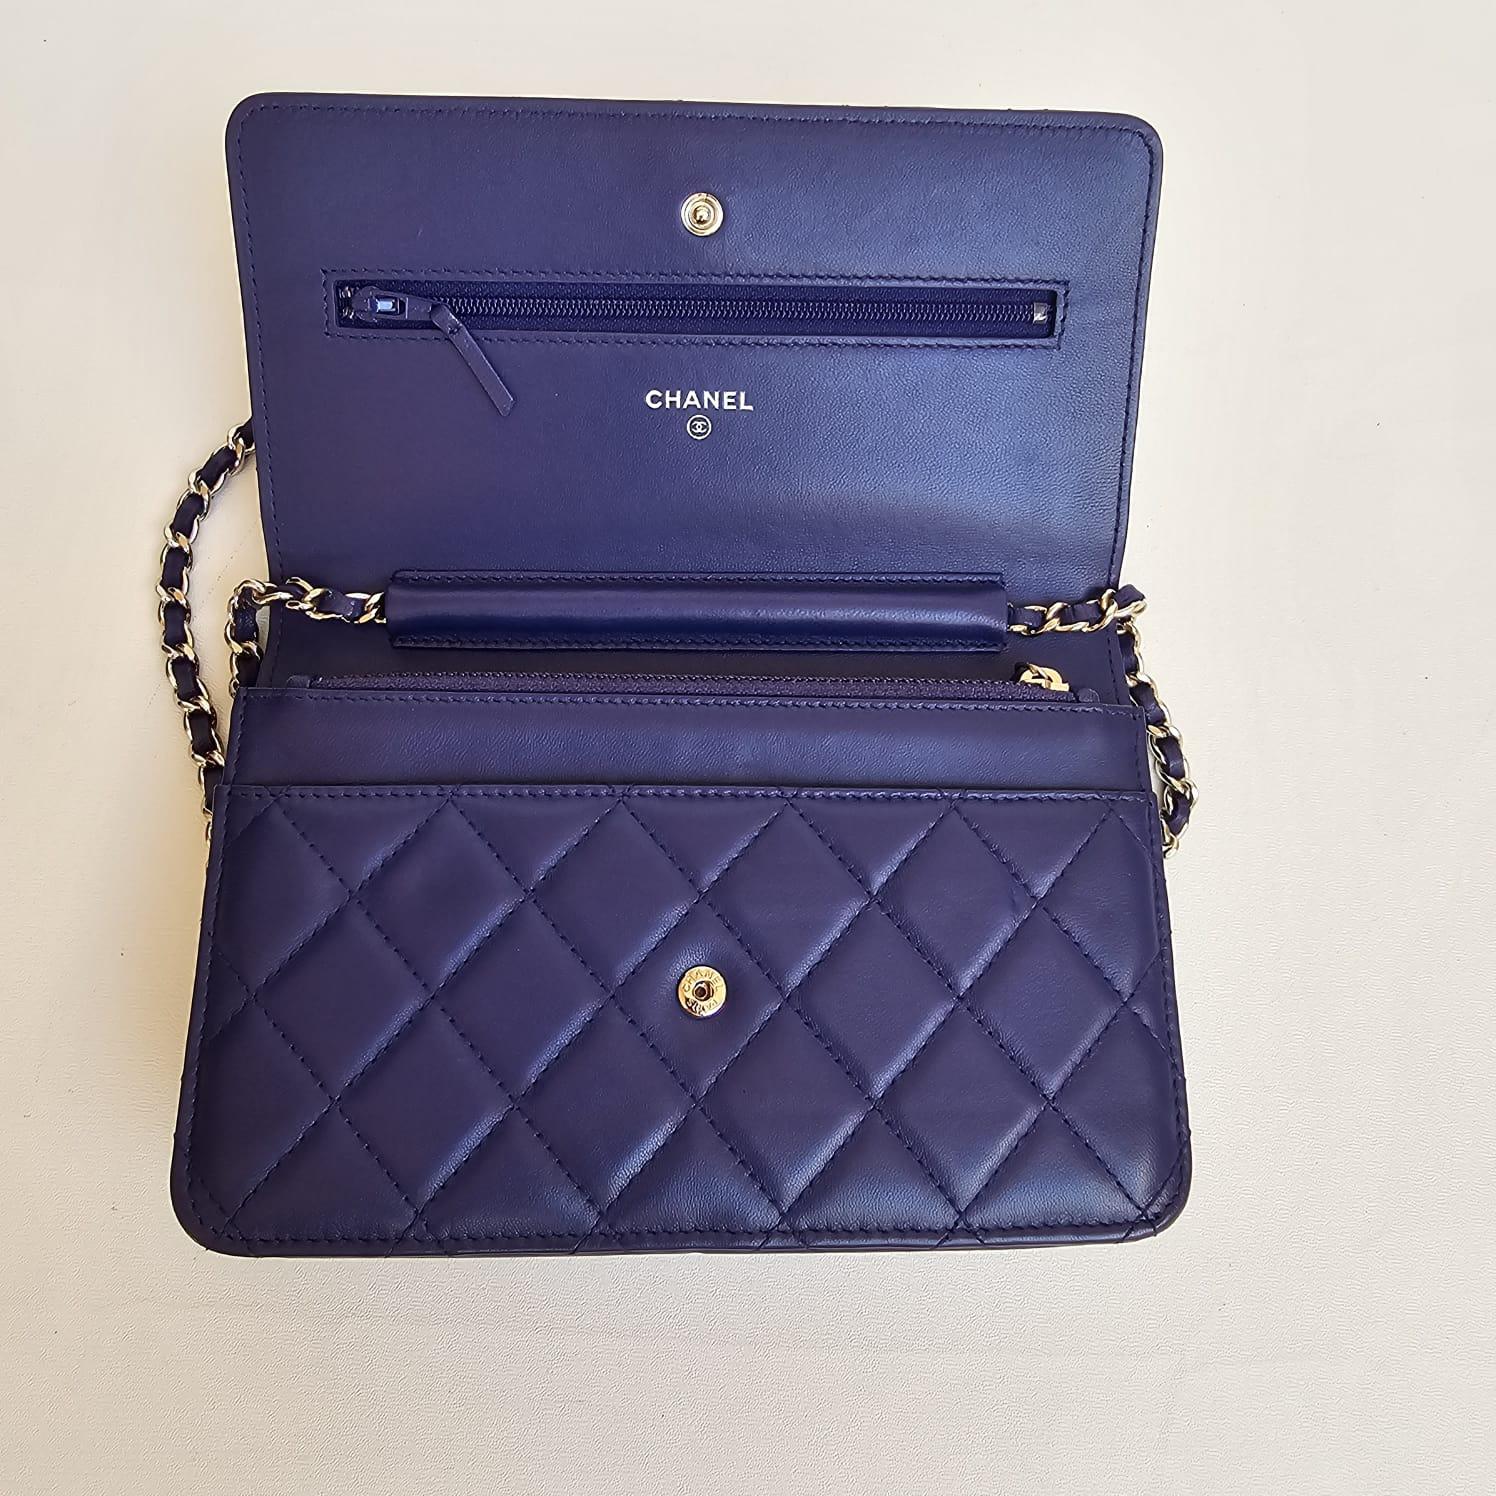 Chanel Blue Electric Lambskin Quilted Wallet on Chain In Good Condition For Sale In Jakarta, Daerah Khusus Ibukota Jakarta